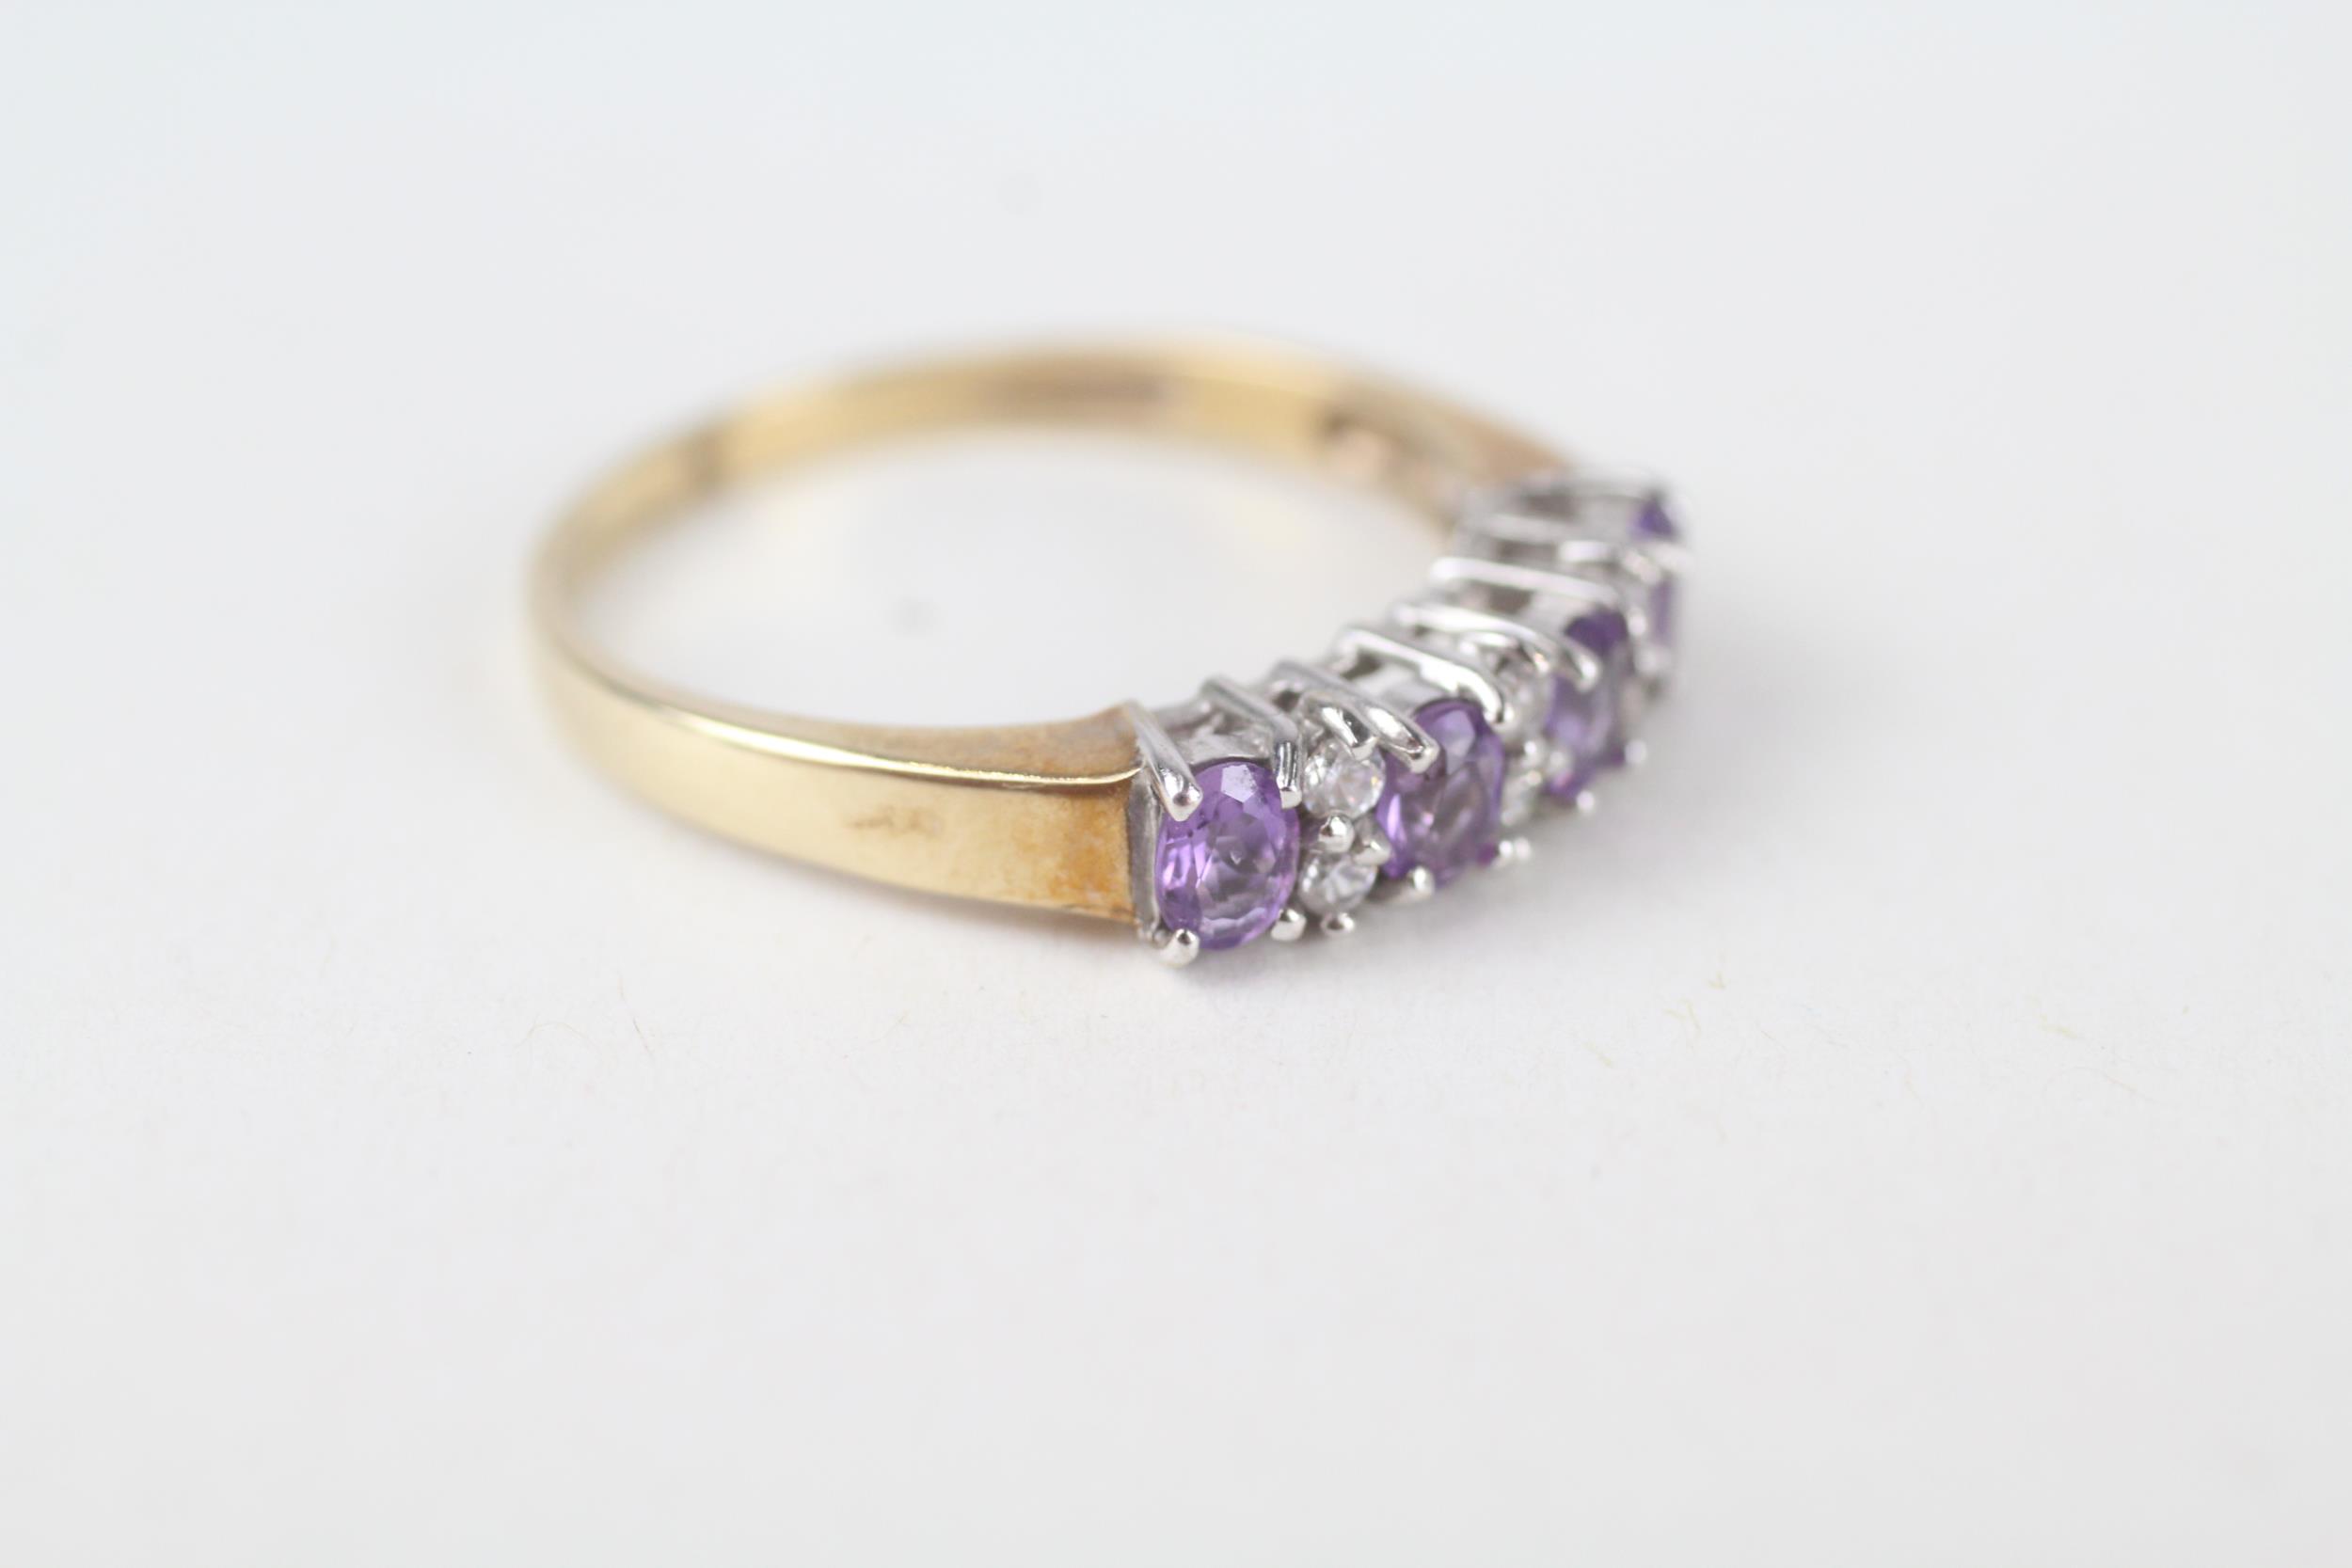 9ct gold amethyst four stone ring with cubic zirconia dividers Size R 1/2 2.6 g - Image 3 of 5